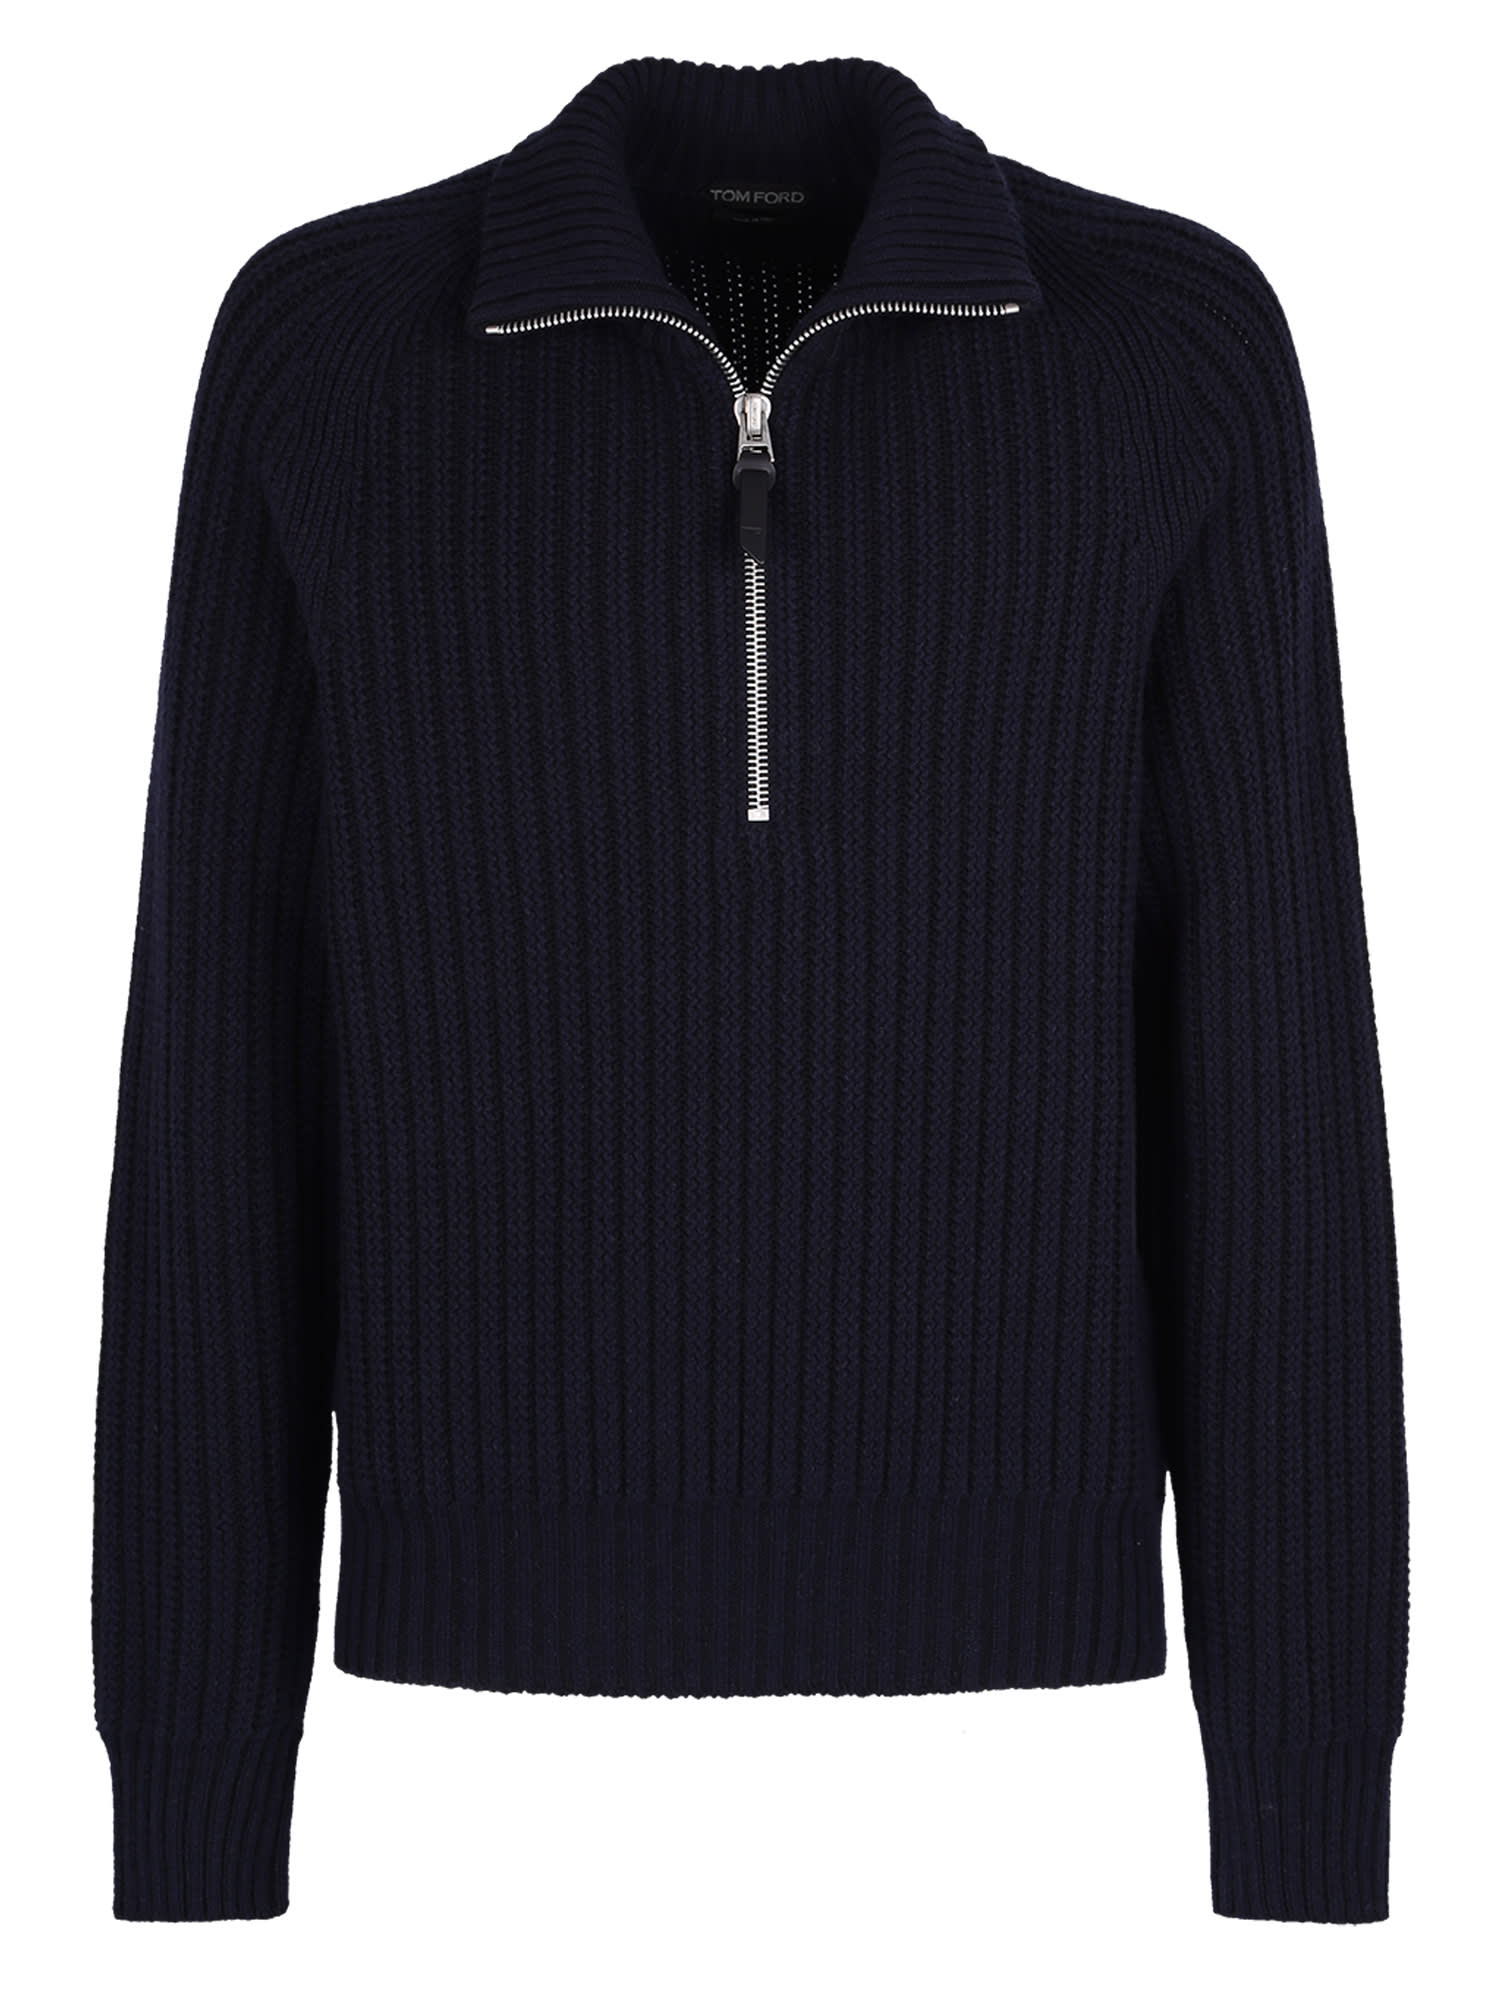 Tom Ford Zipped Sweater